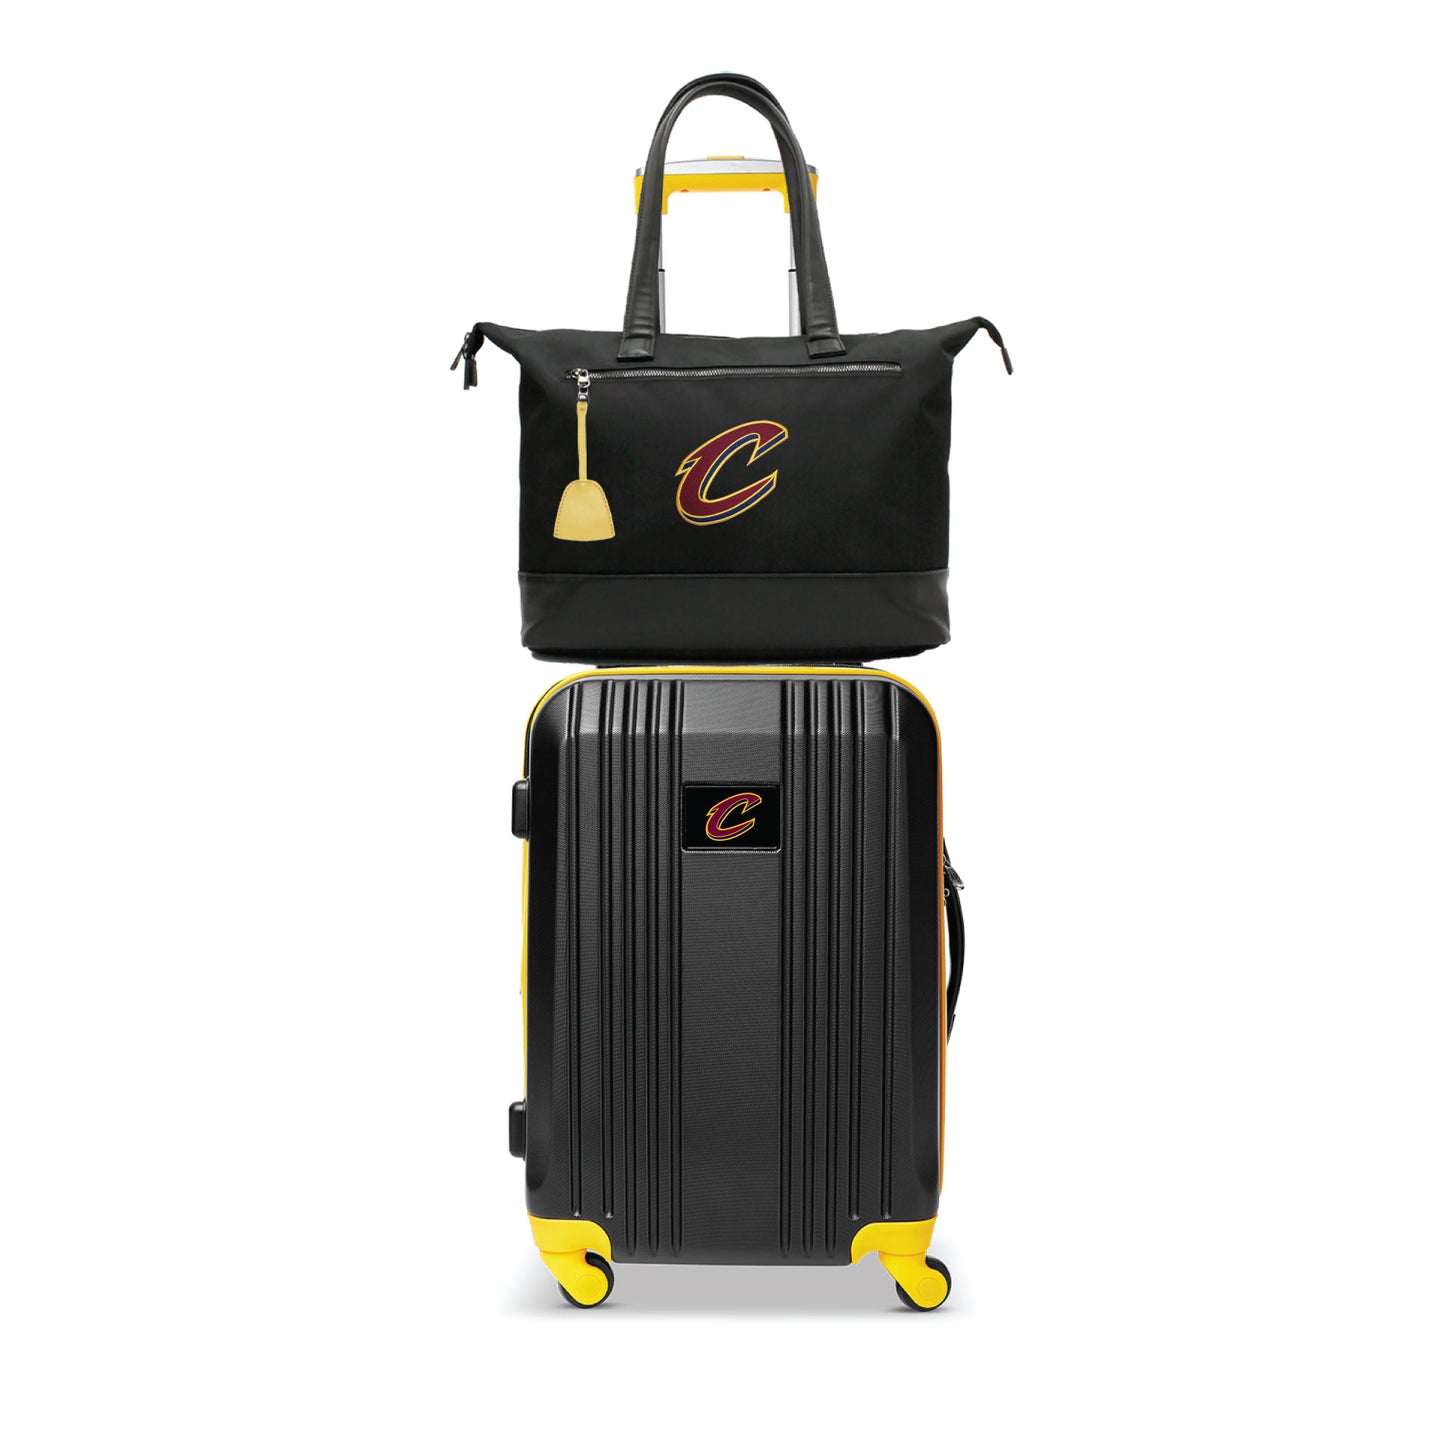 Cleveland Cavaliers Premium Laptop Tote Bag and Luggage Set